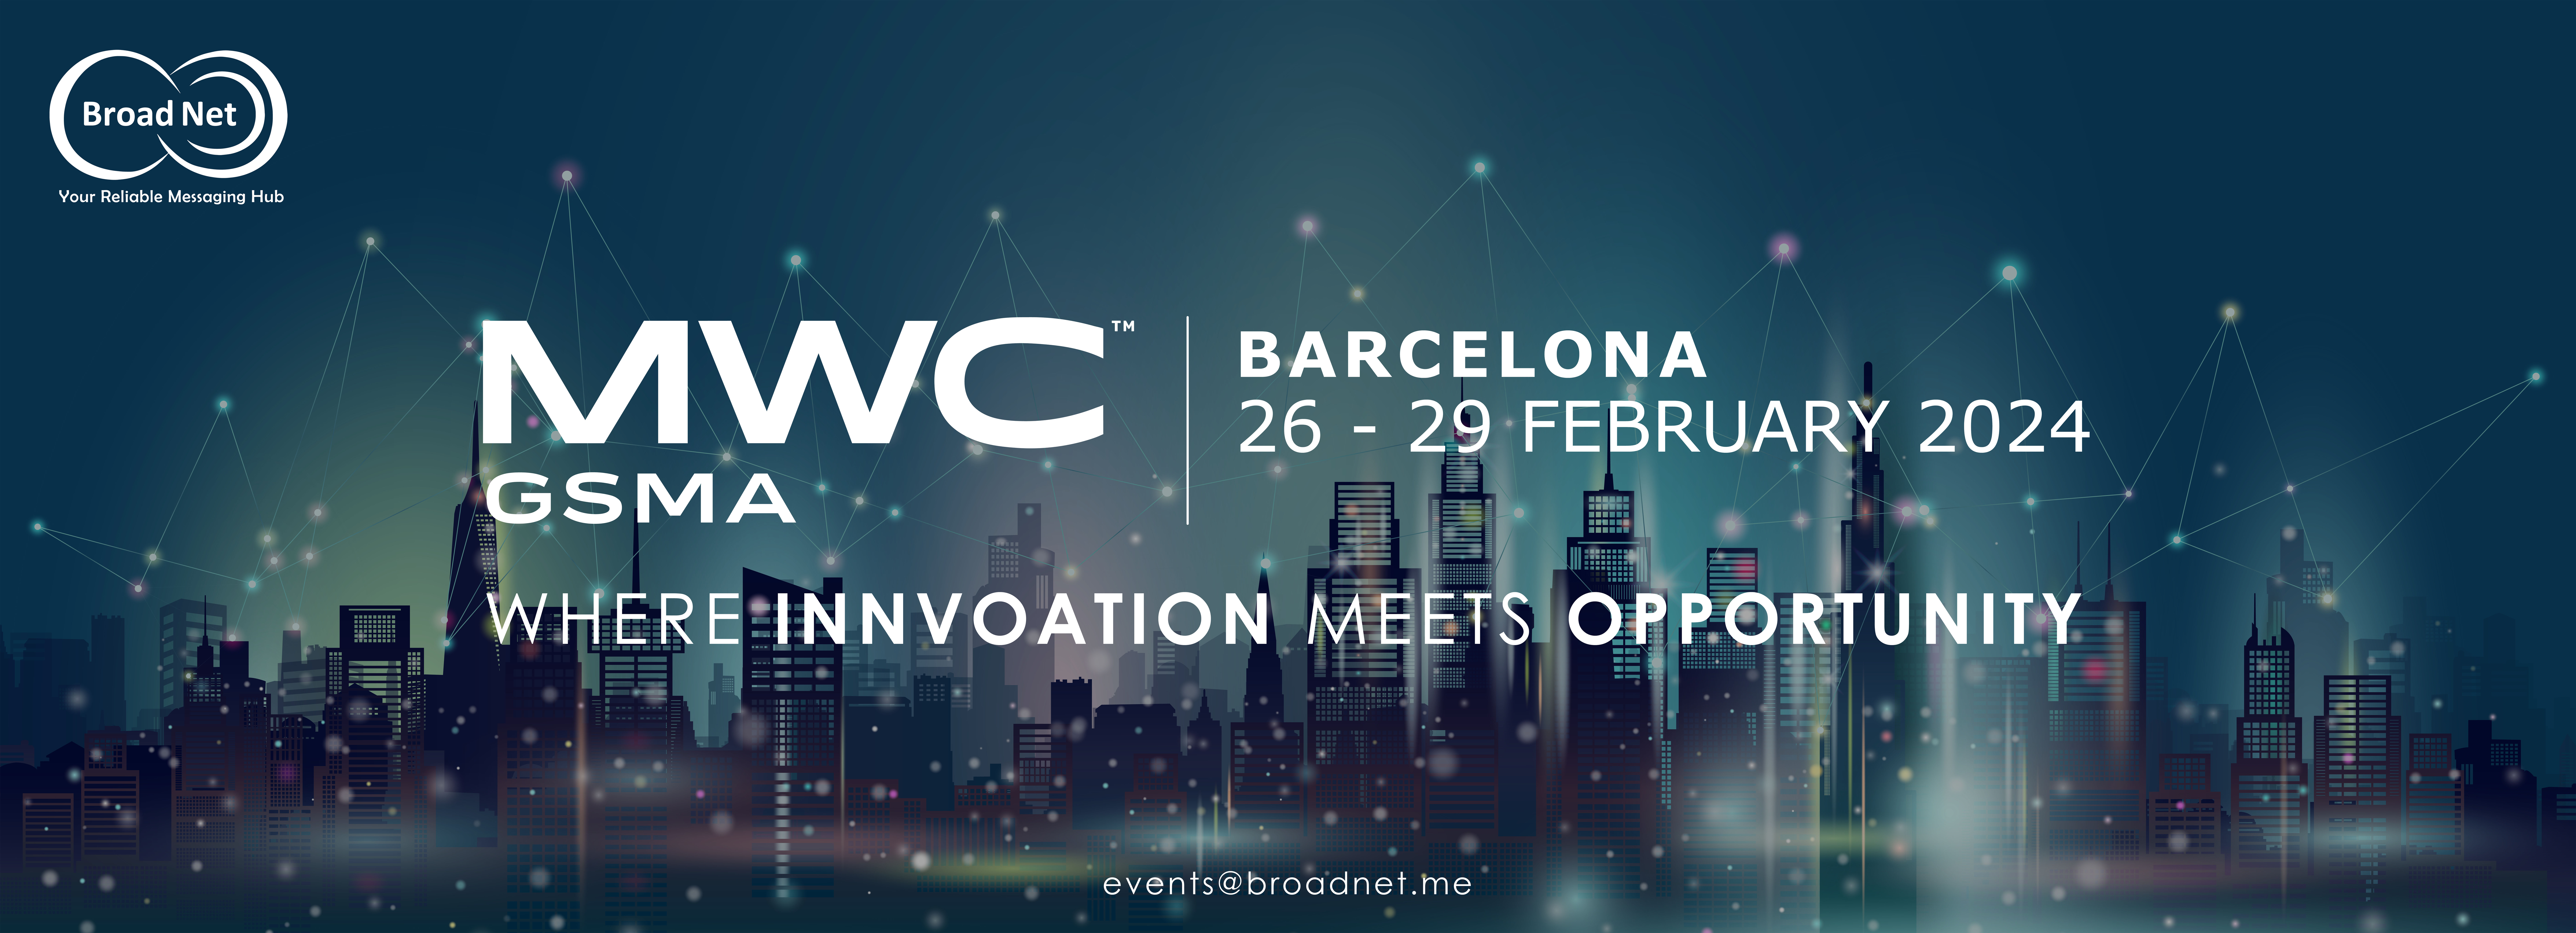 MWC 2024 Barcelona, Where Innovation Meets Opportunity